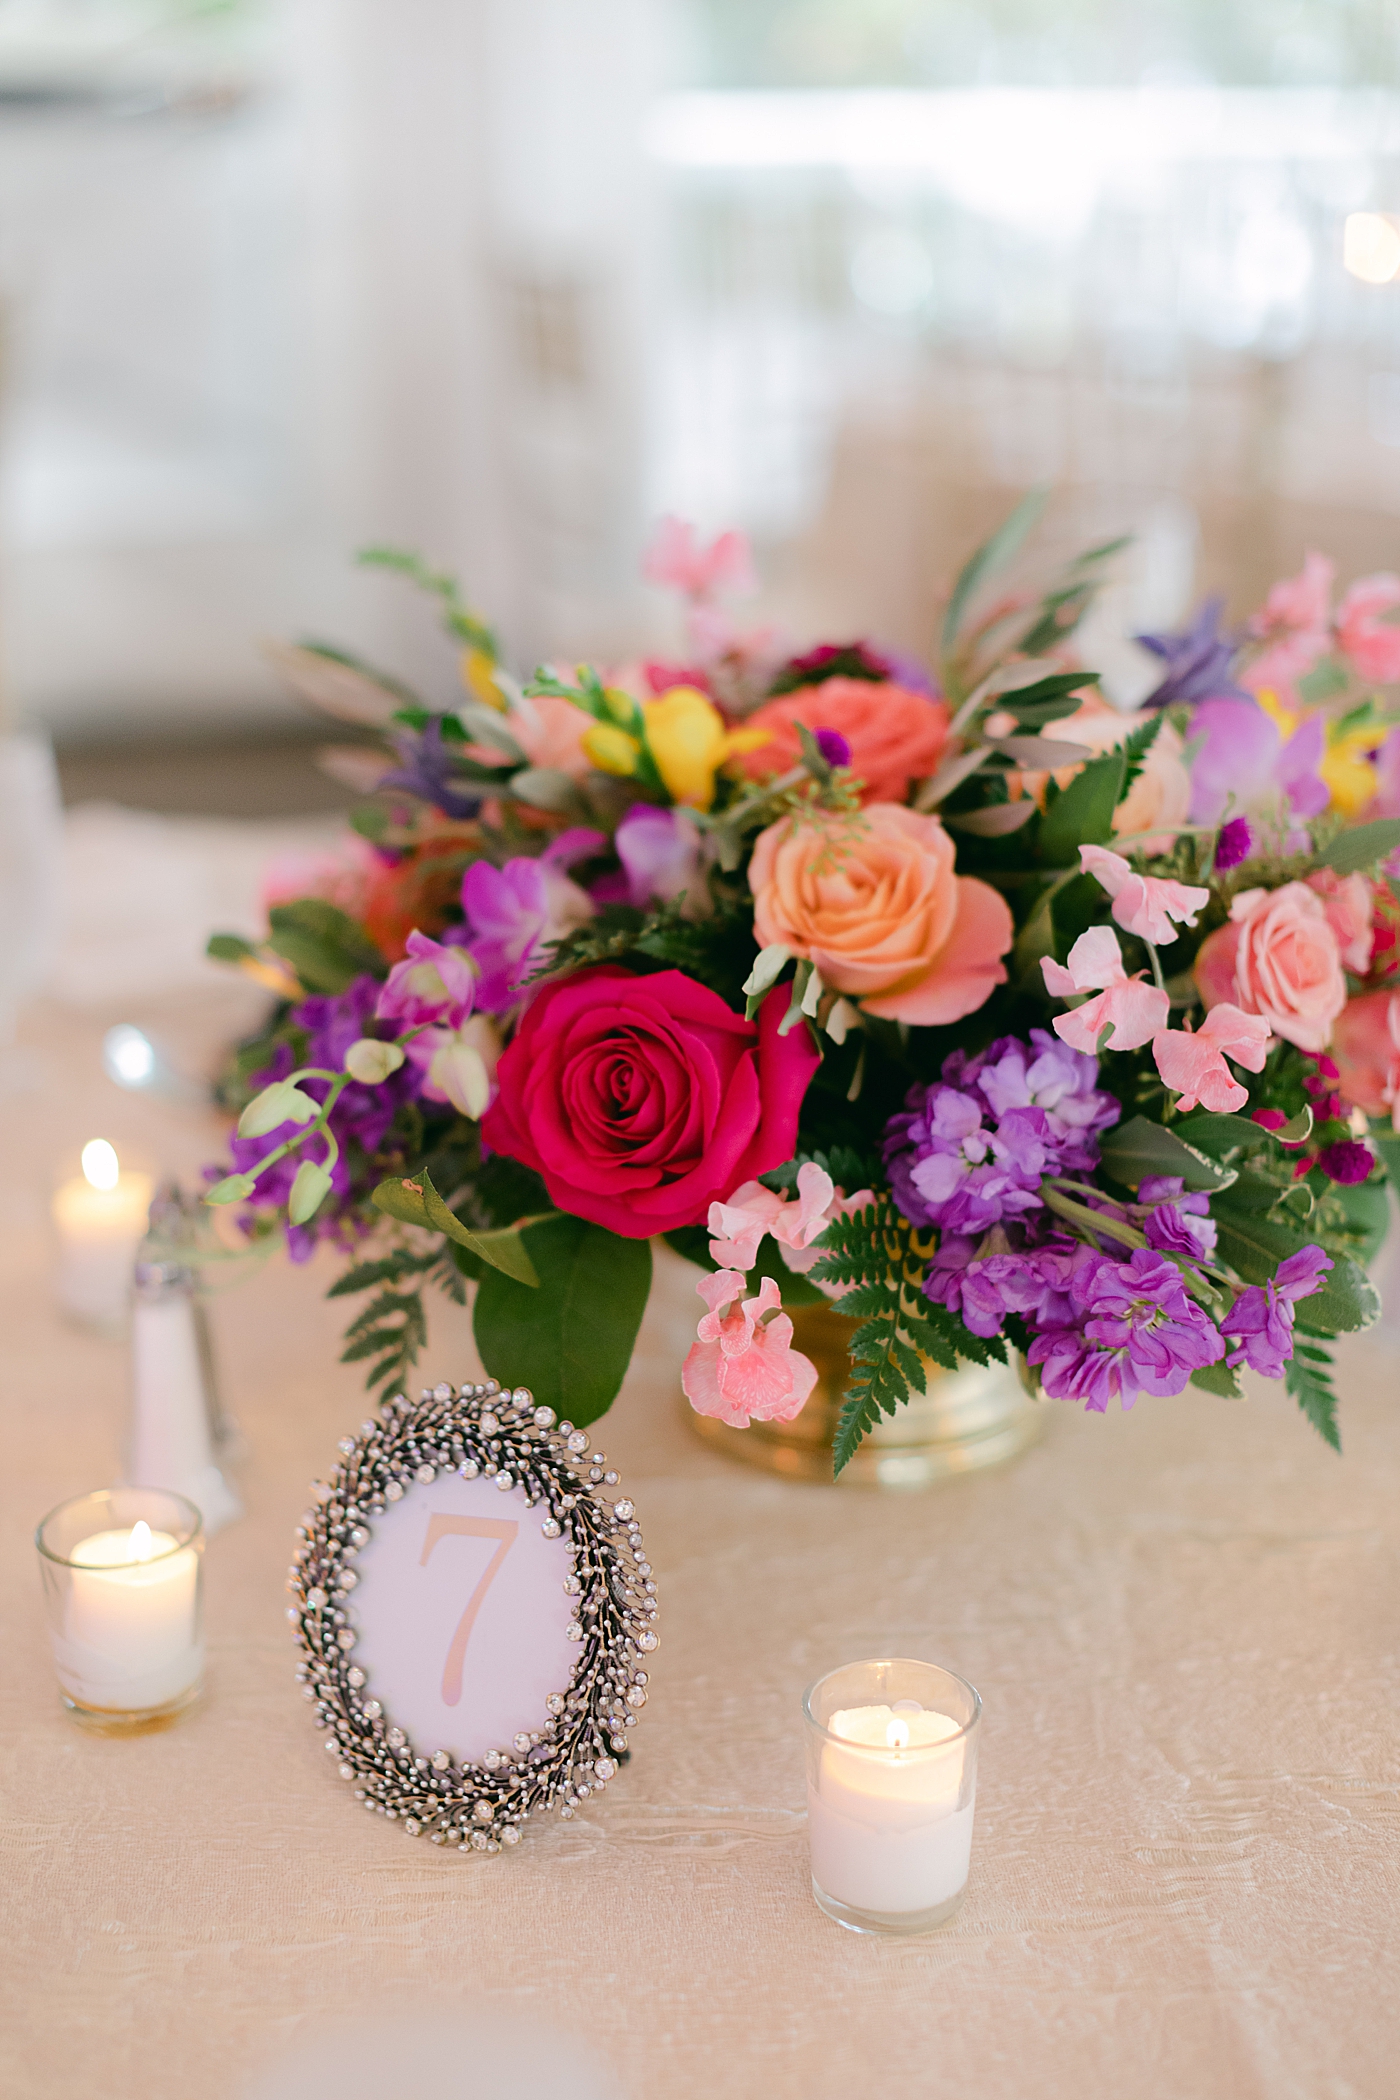 Reception table and floral details during their Sagamore Wedding | Image by Hope Helmuth Photography